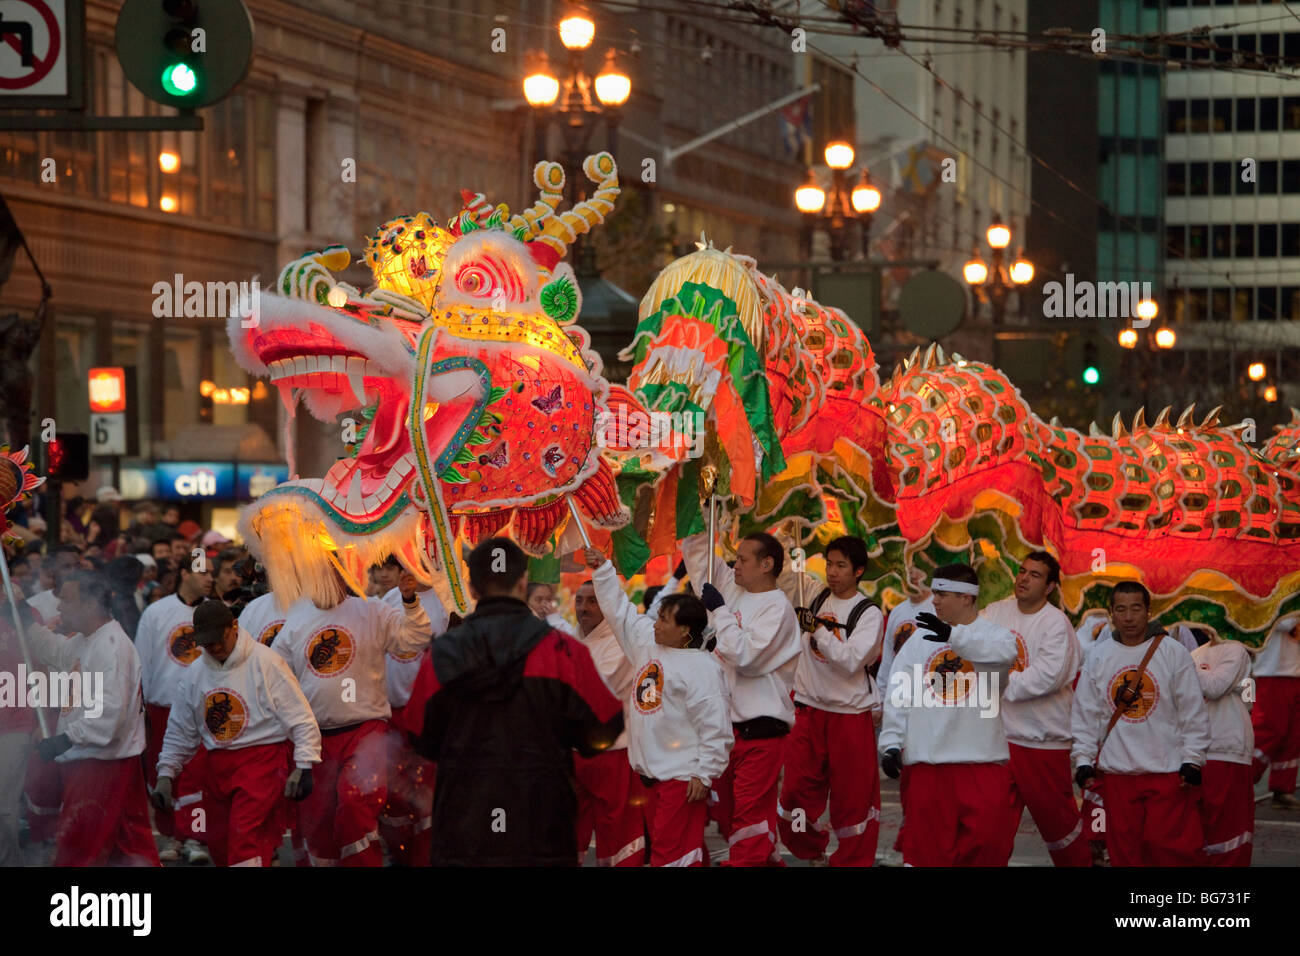 Chinese New Year's dragon dance begins at dusk on Market Street in San Francisco, California. Stock Photo